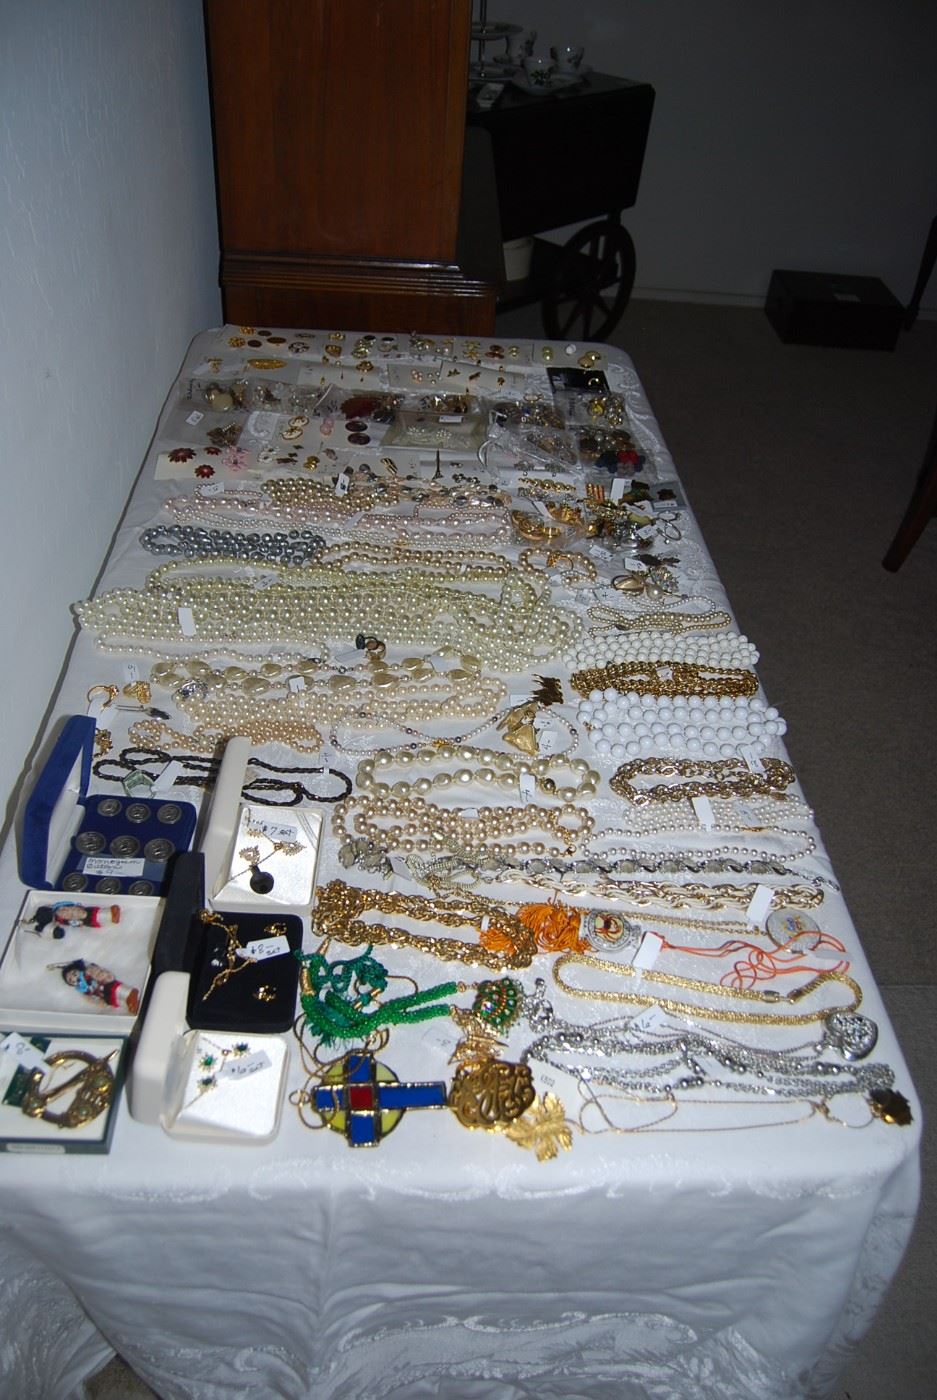 about 1/2 of the costume jewelry is available for Saturday purchase